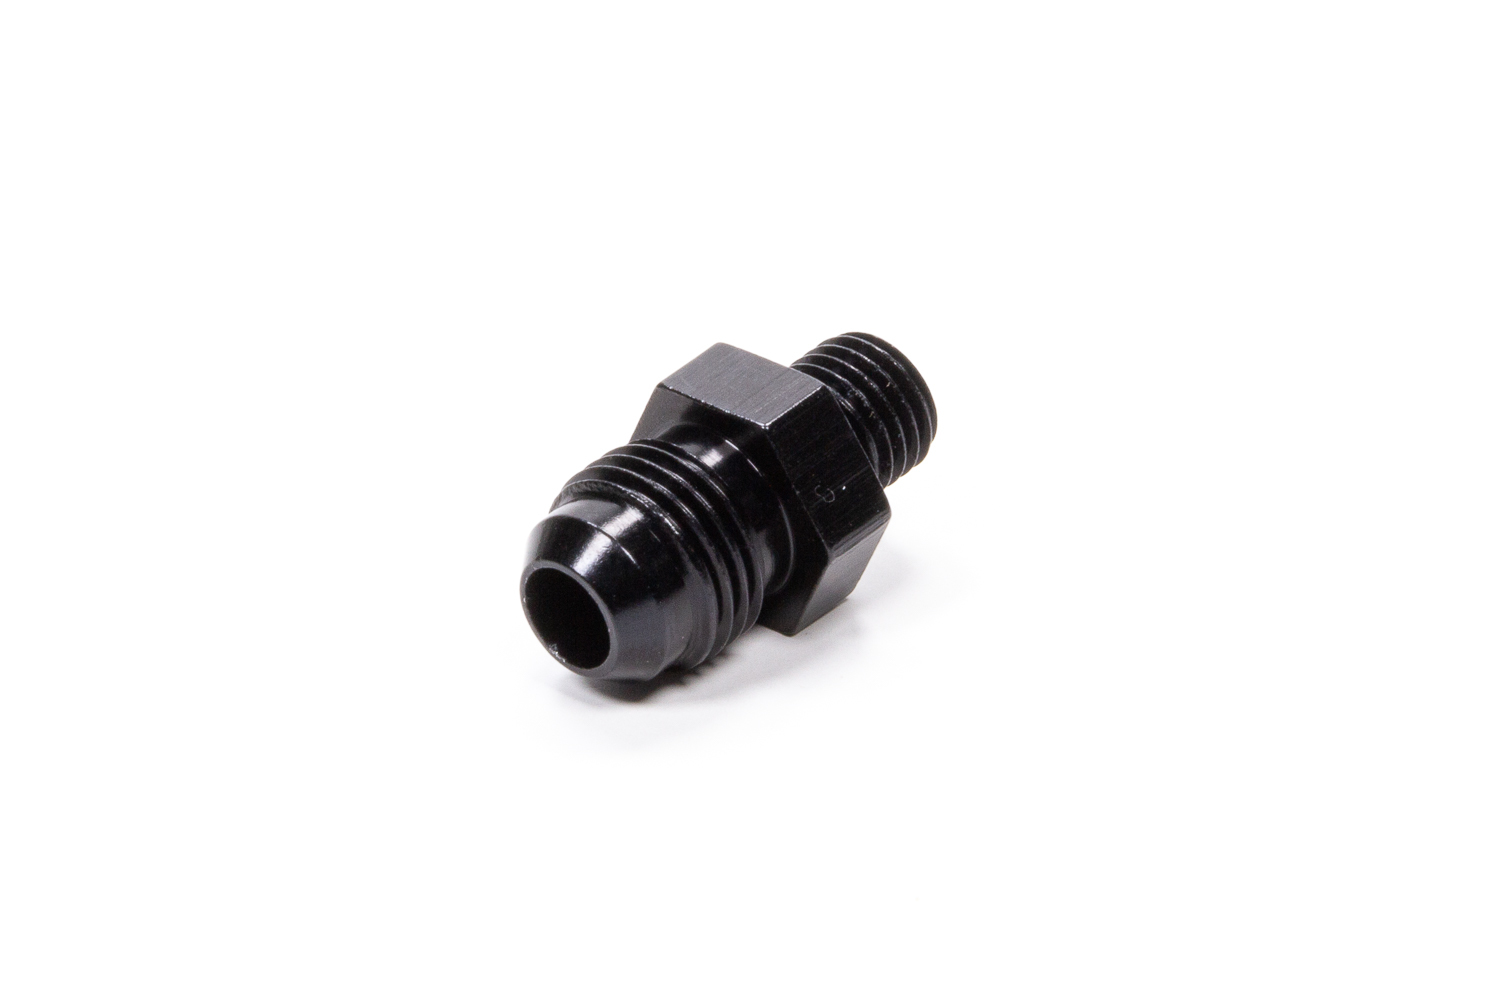 Fragola 481606-BL Fitting, Adapter, Straight, 6 AN Male to 1/4 in NPT Male, Aluminum, Black Anodized, Each